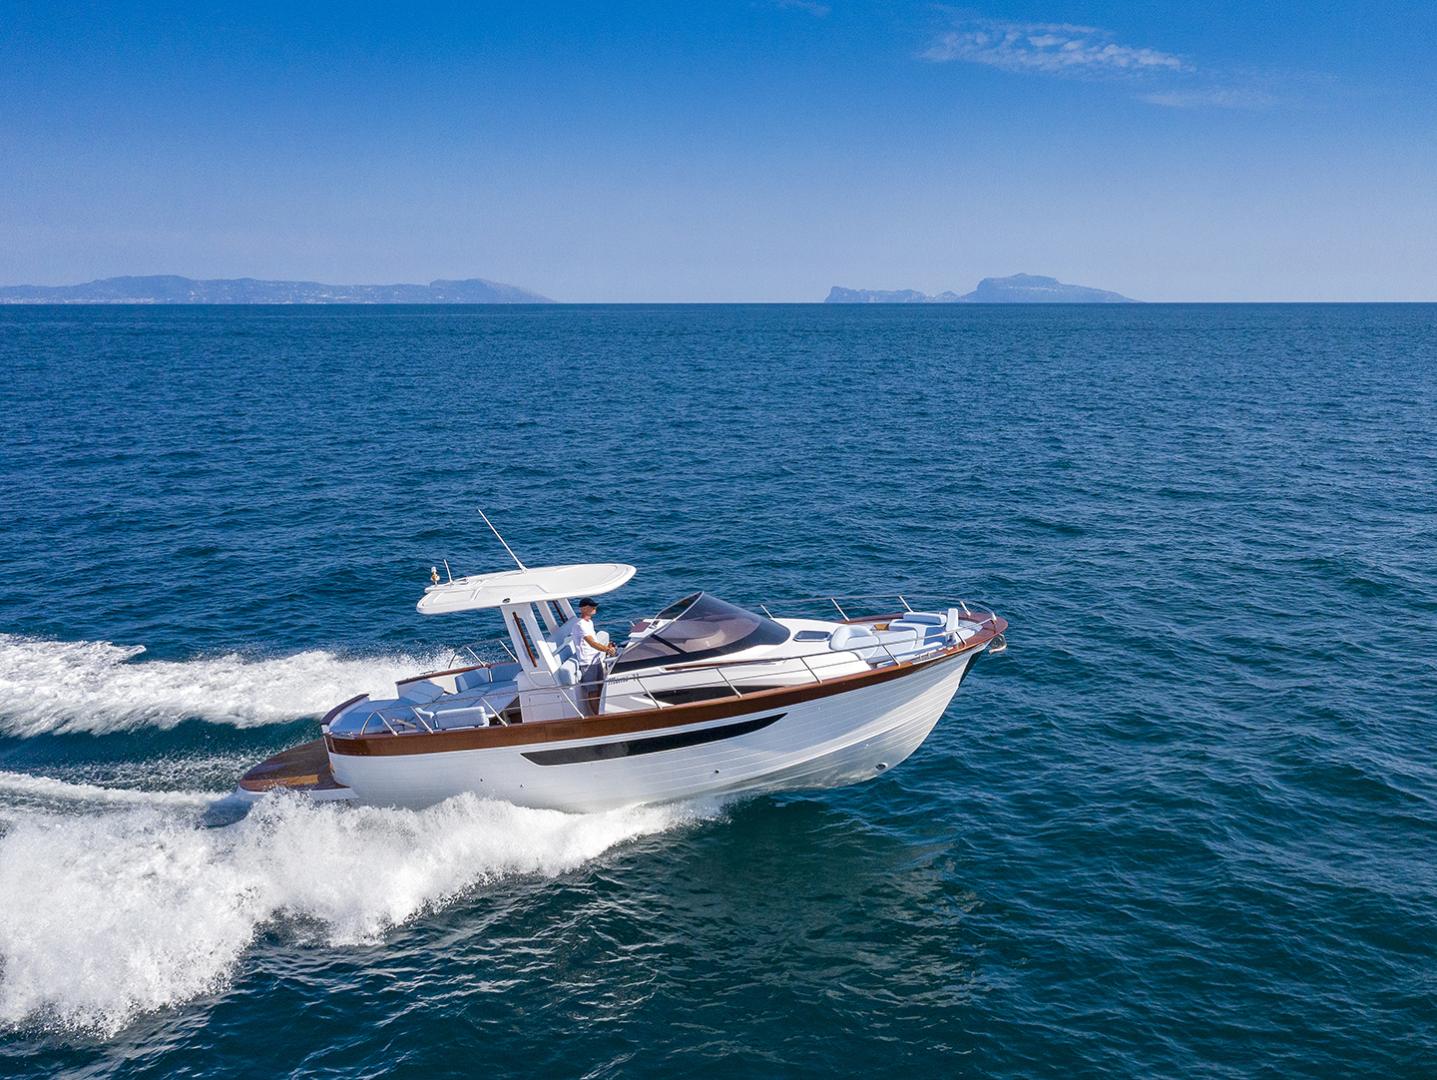 Gozzi Mimì at the Cannes Yachting Festival with the Libeccio 11